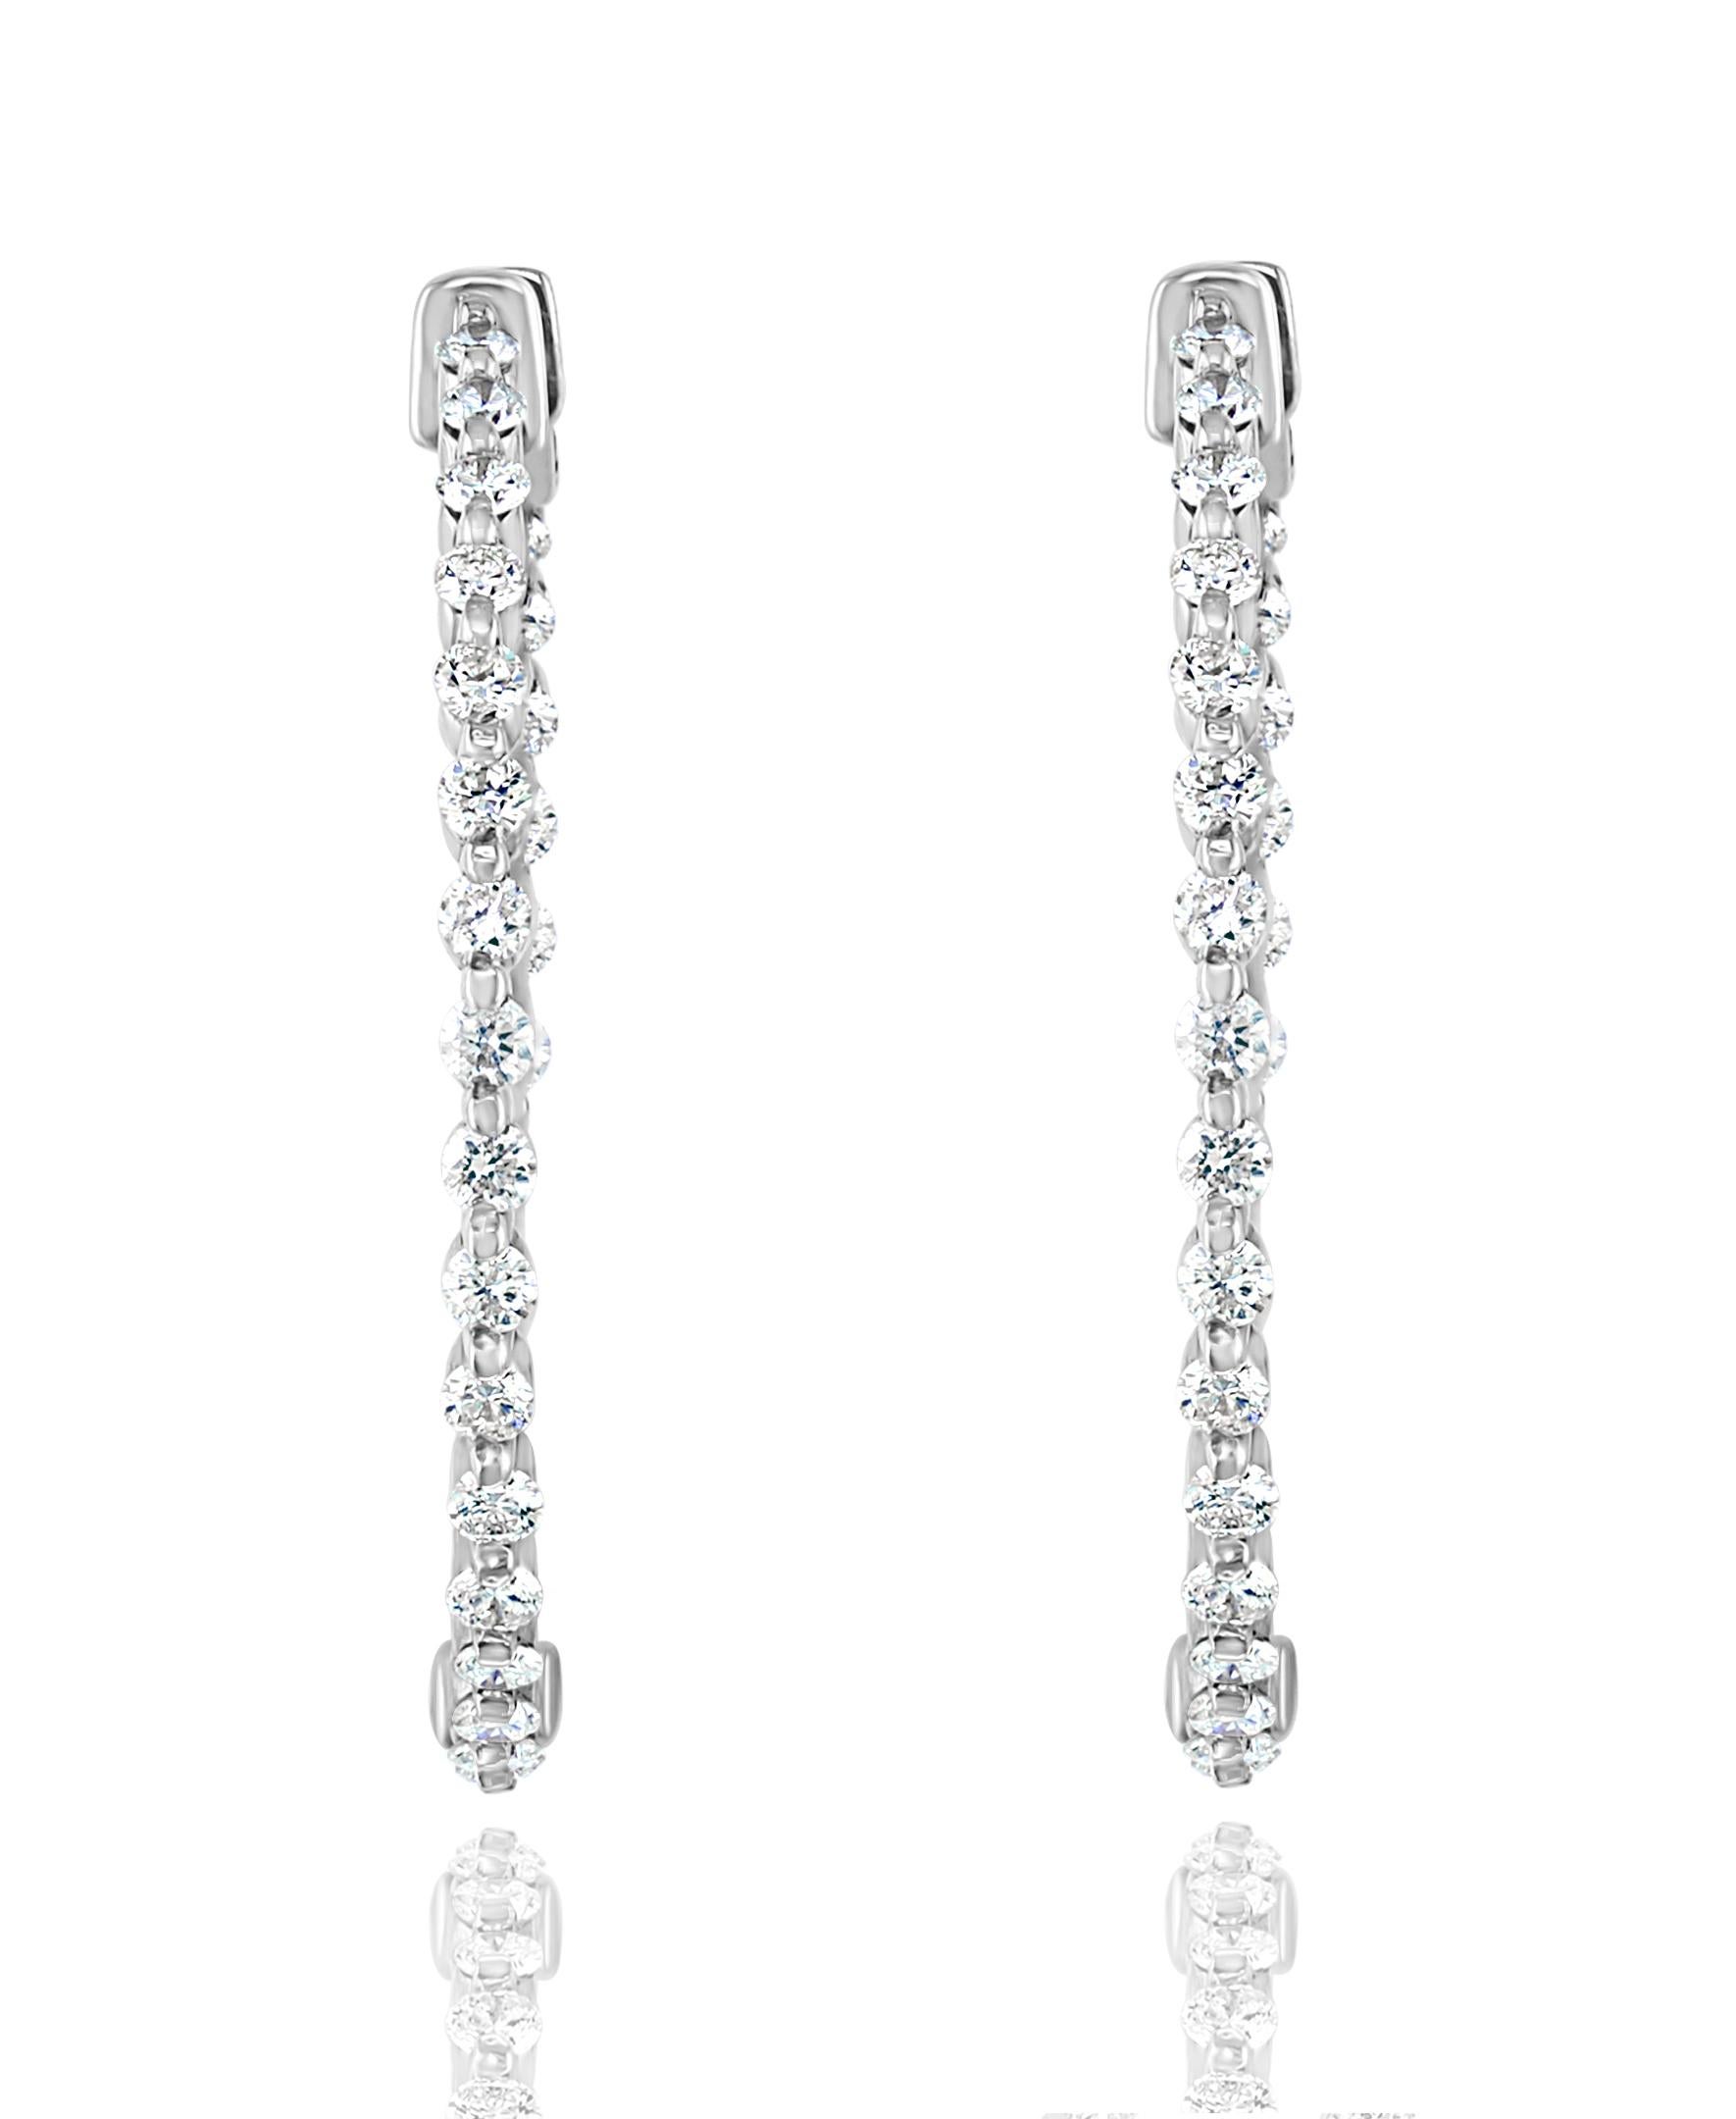 Round Cut 2.05 Carat Brilliant Cut Round Diamond Hoop Earrings in 14K White Gold For Sale